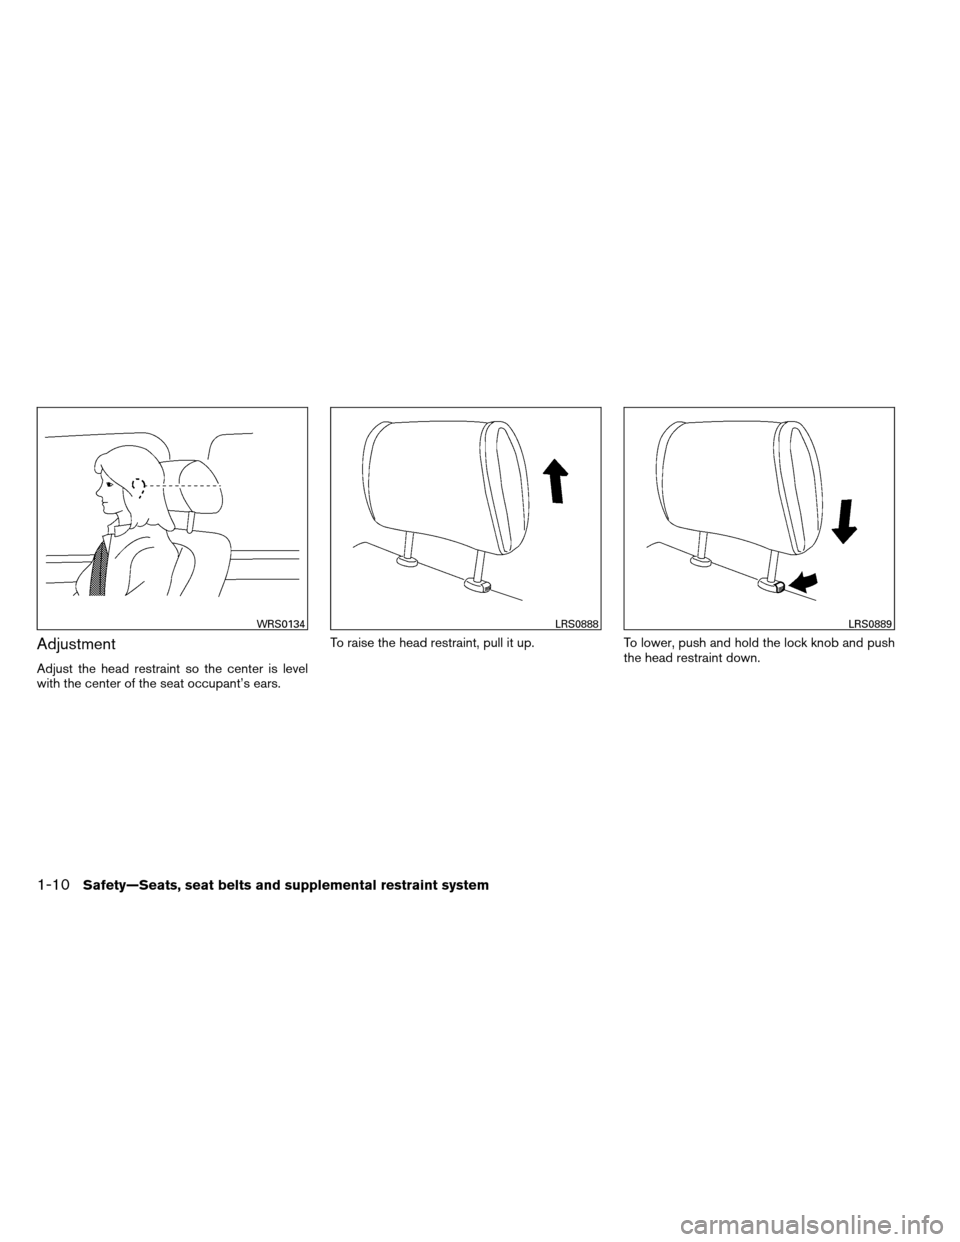 NISSAN ALTIMA COUPE 2013 D32 / 4.G Owners Manual Adjustment
Adjust the head restraint so the center is level
with the center of the seat occupant’s ears.To raise the head restraint, pull it up.
To lower, push and hold the lock knob and push
the he